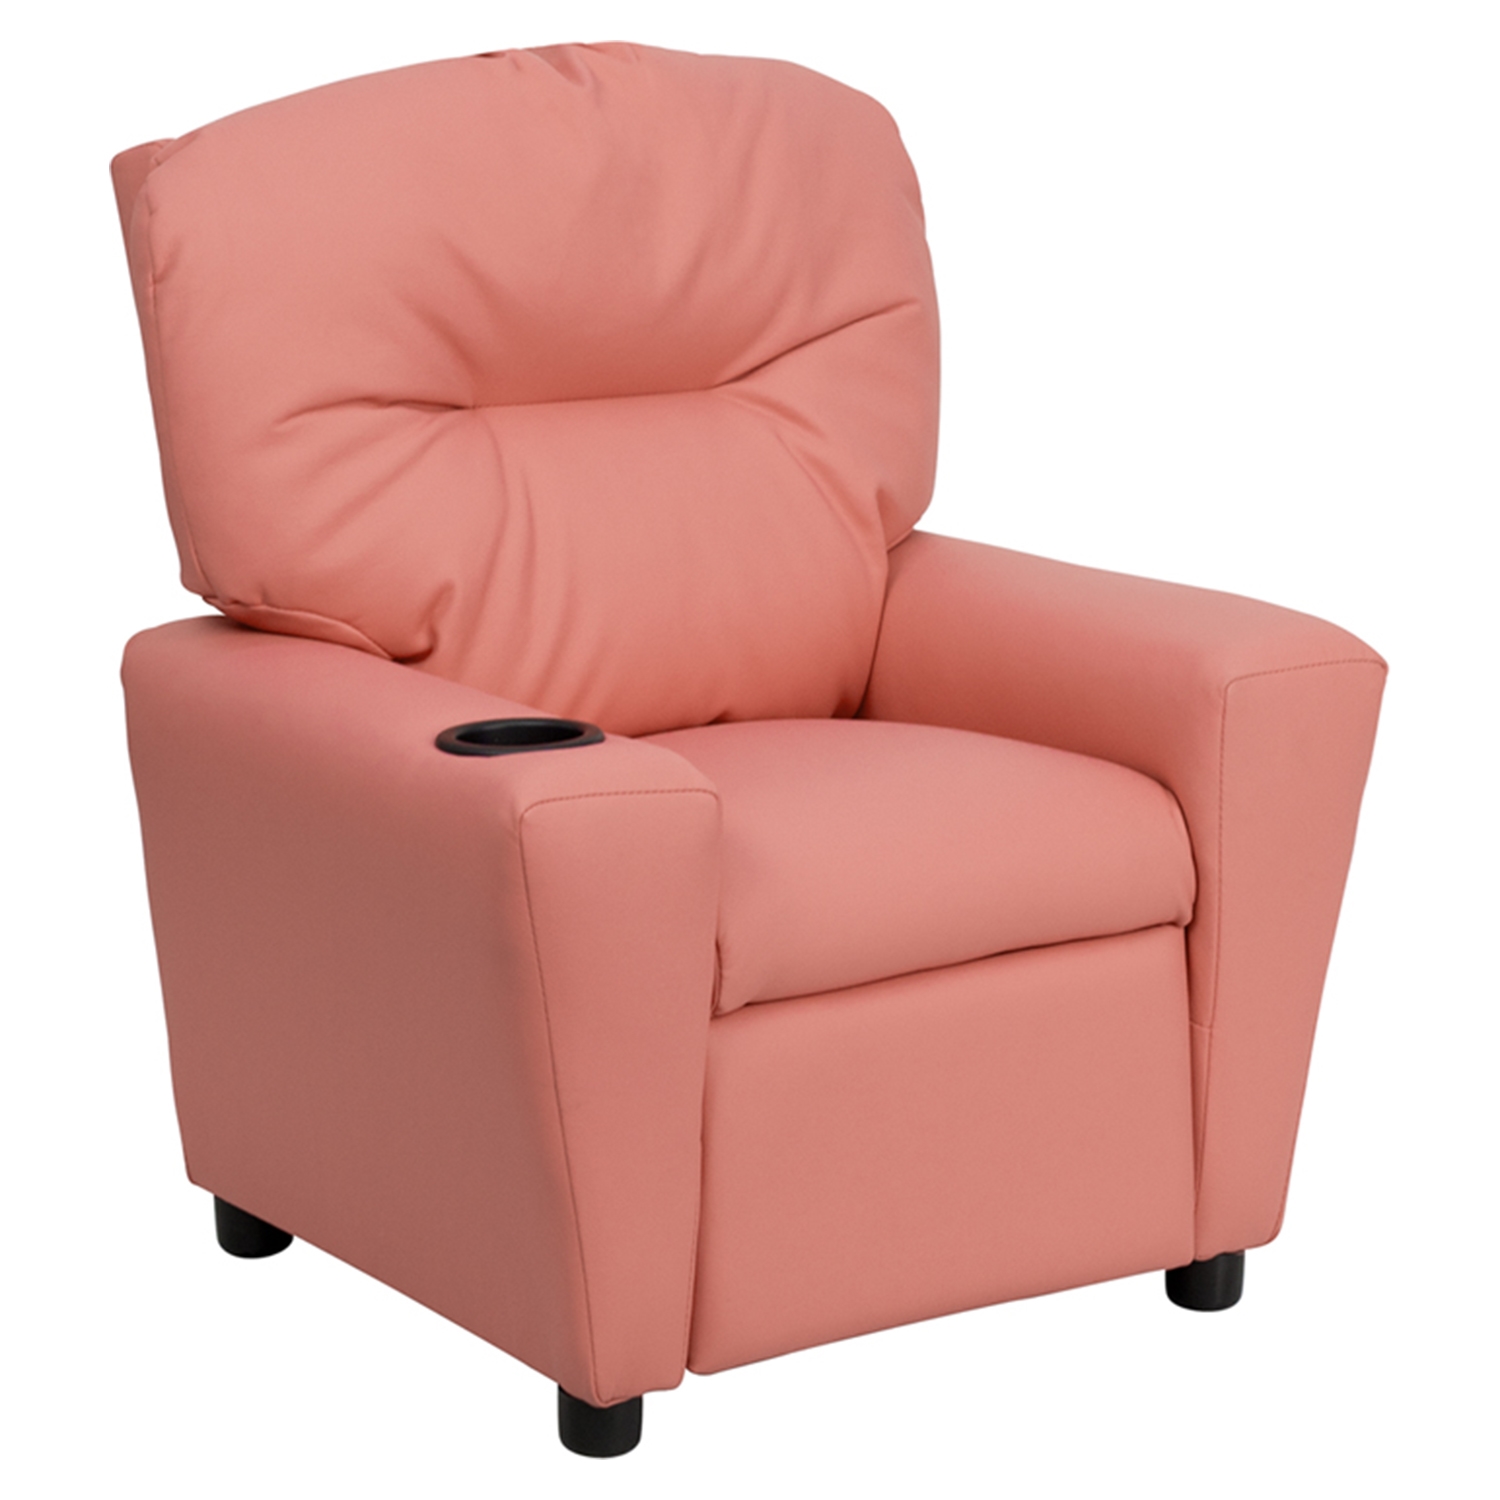 recliner chair for toddlers